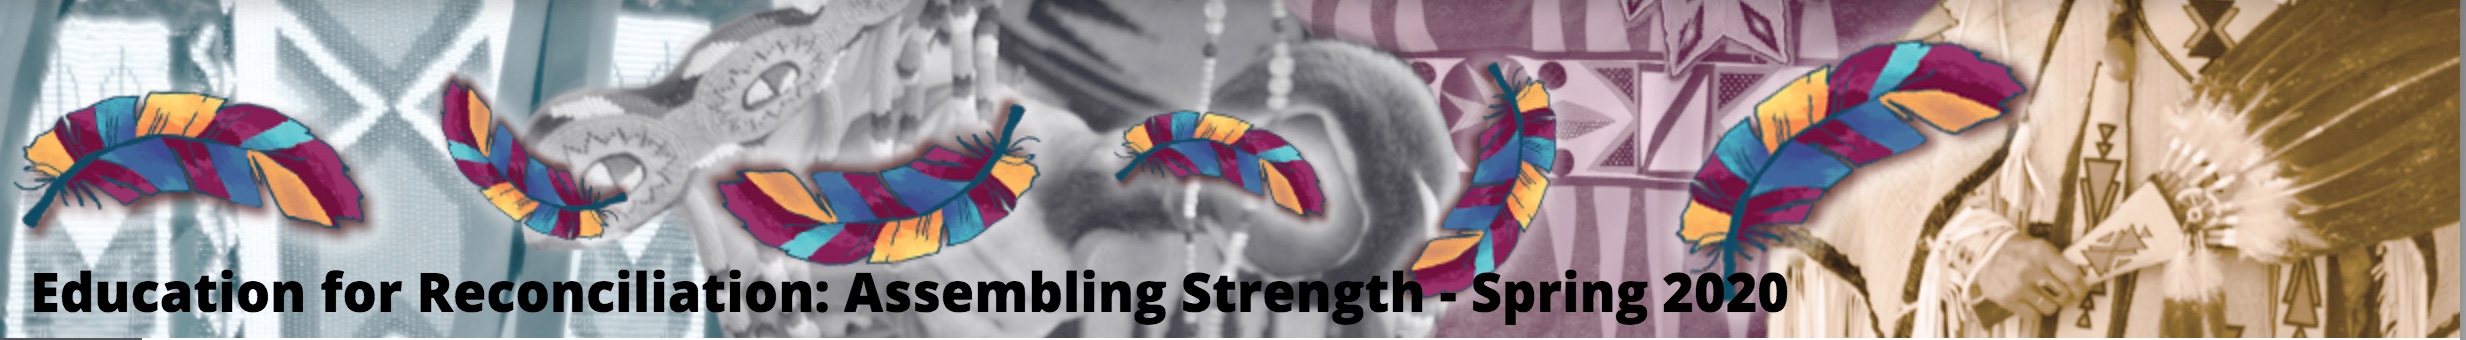 Education for Reconciliation: Assembling Strength